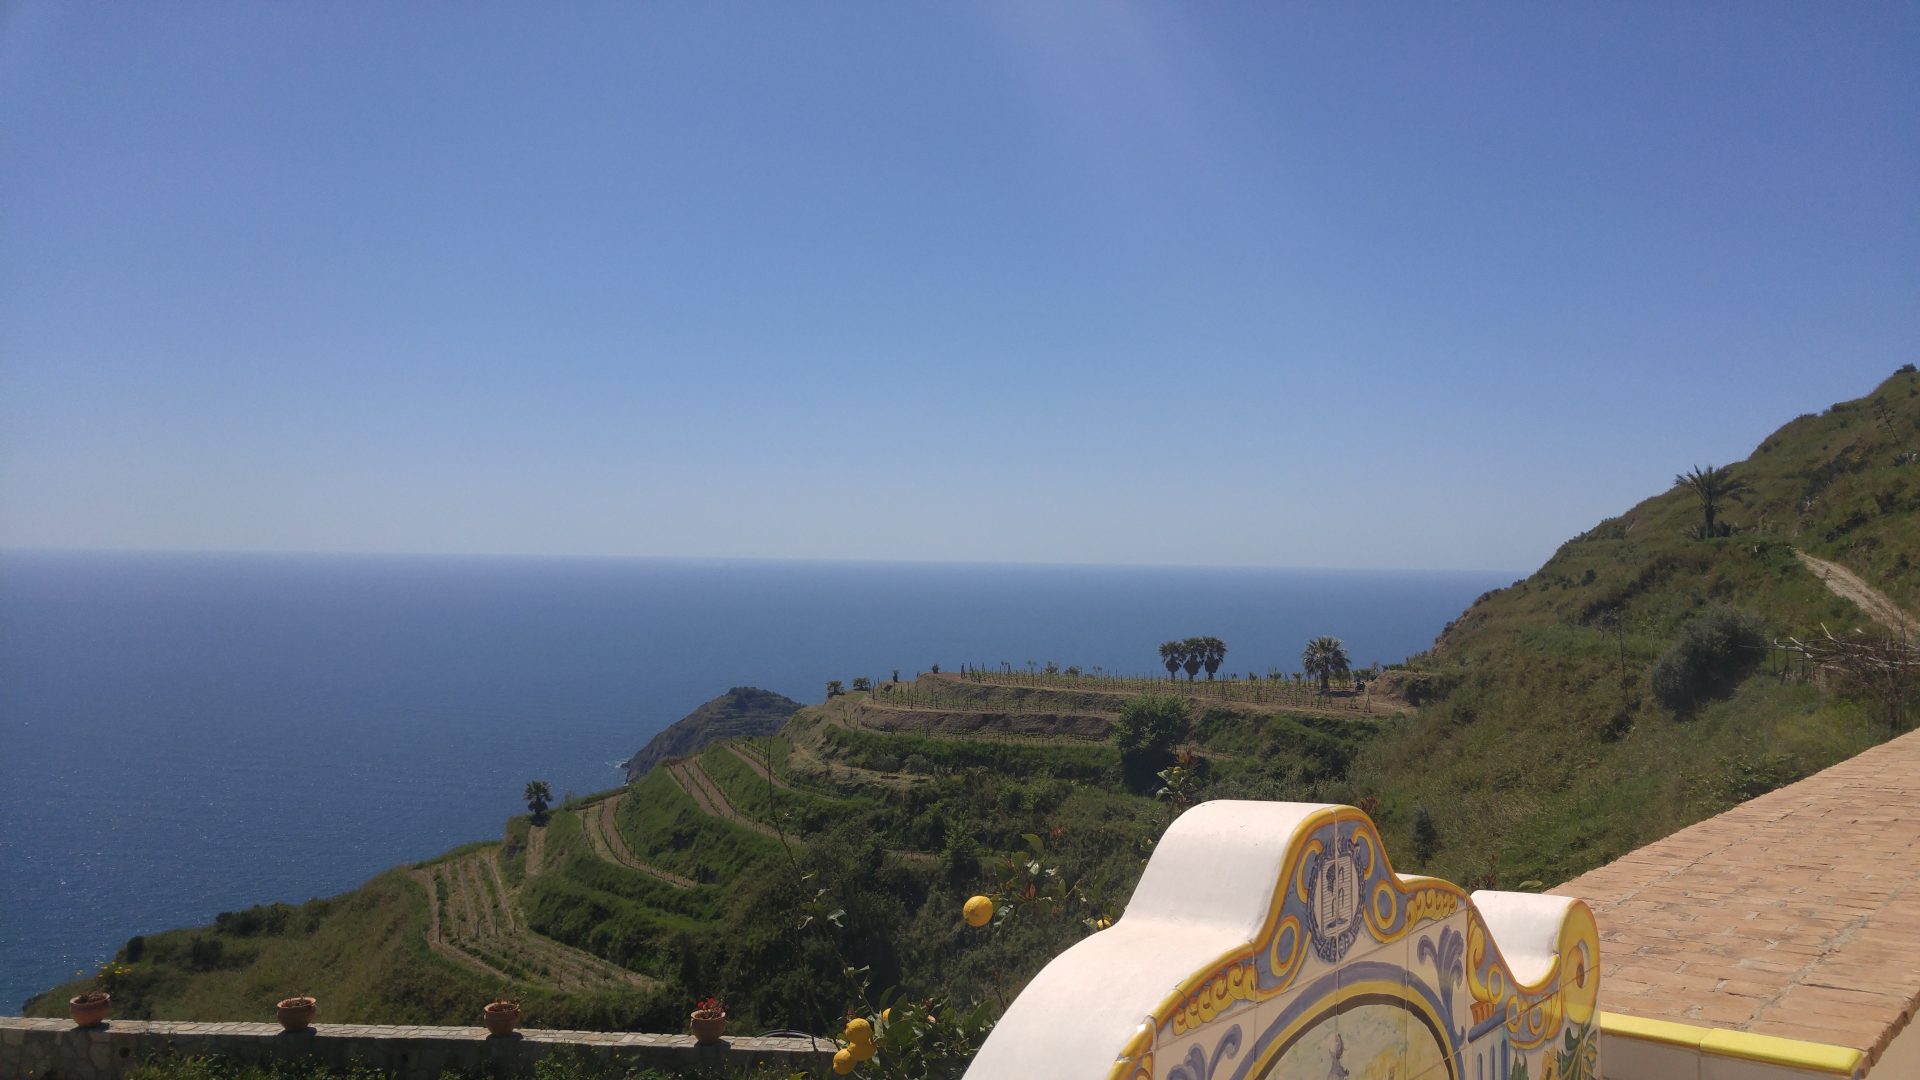 Ischia was an absolute paradise. Here you can see the vineyards of Casa d'Ambra set against the  ocean at what seems to be the end of the world.